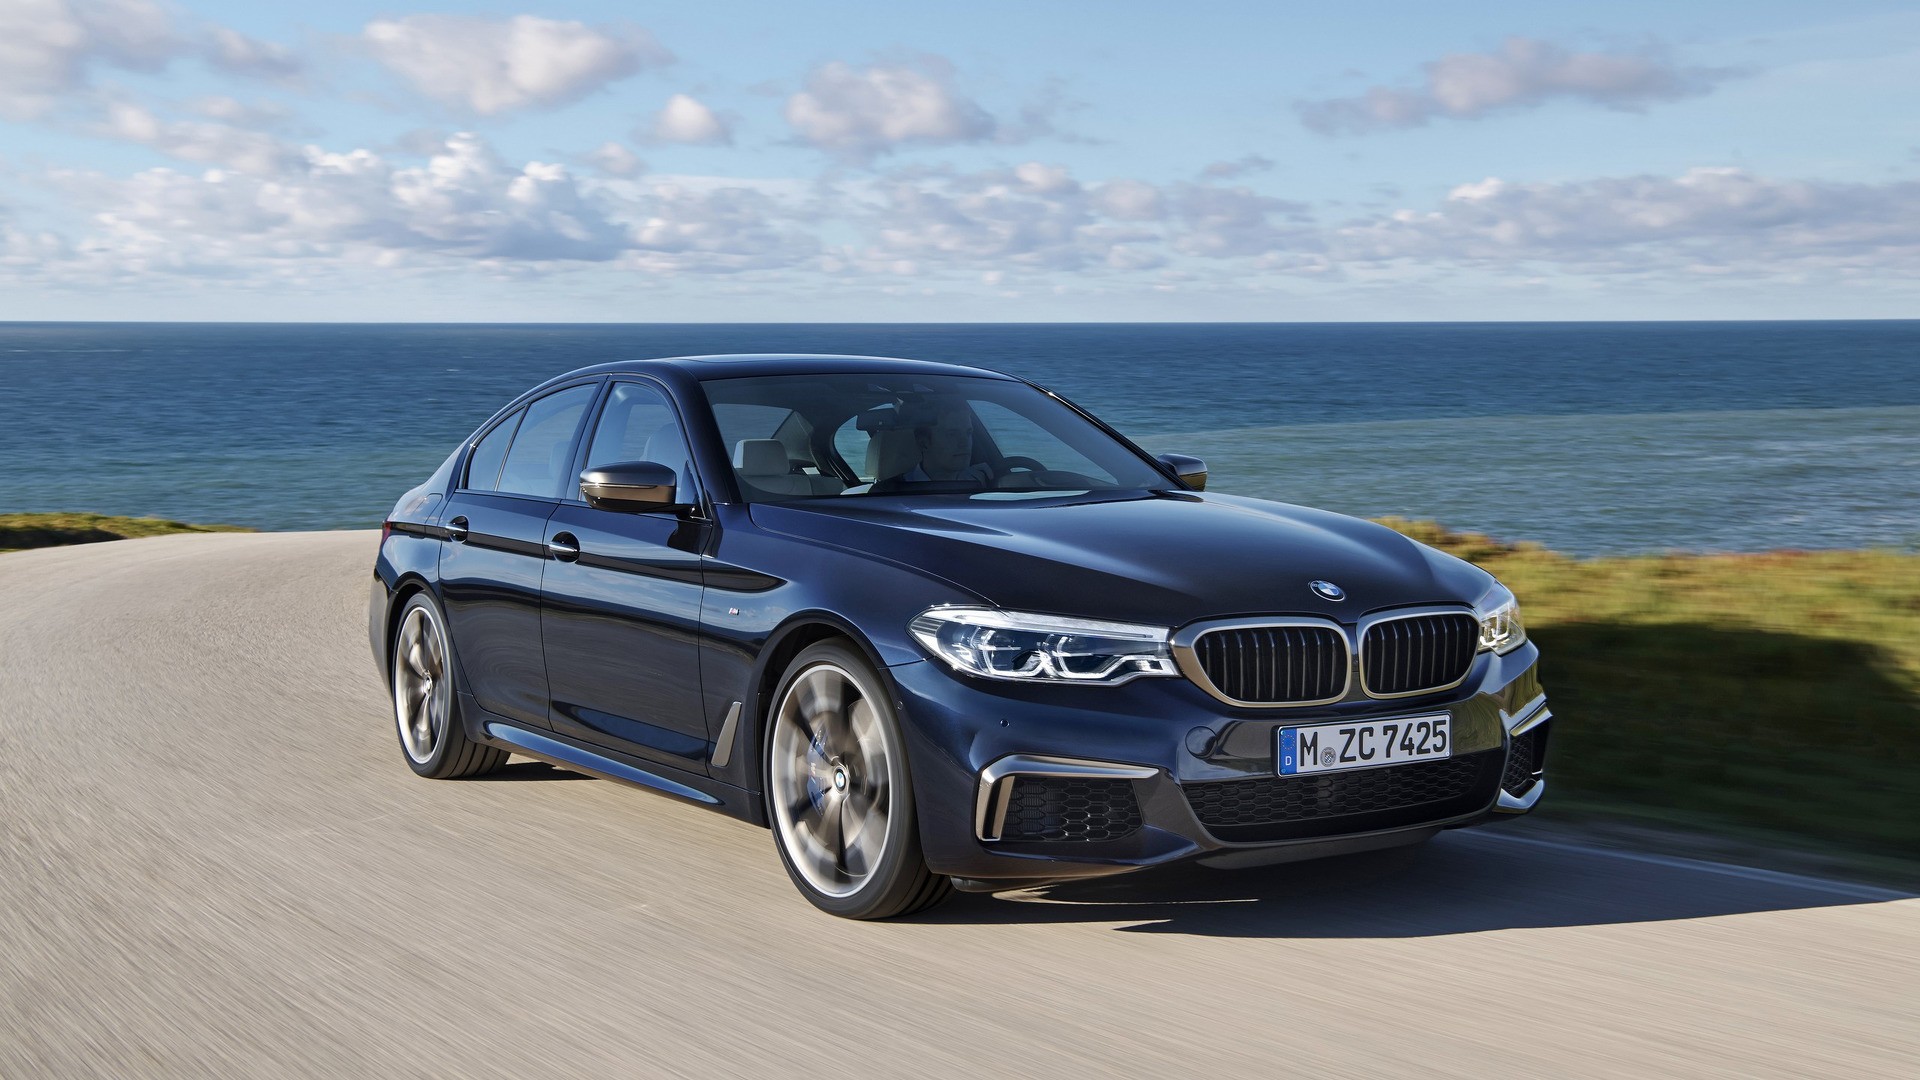 BMW Introduces 2018 6 Series, 530e iPerformance, M550i xDrive for U.S